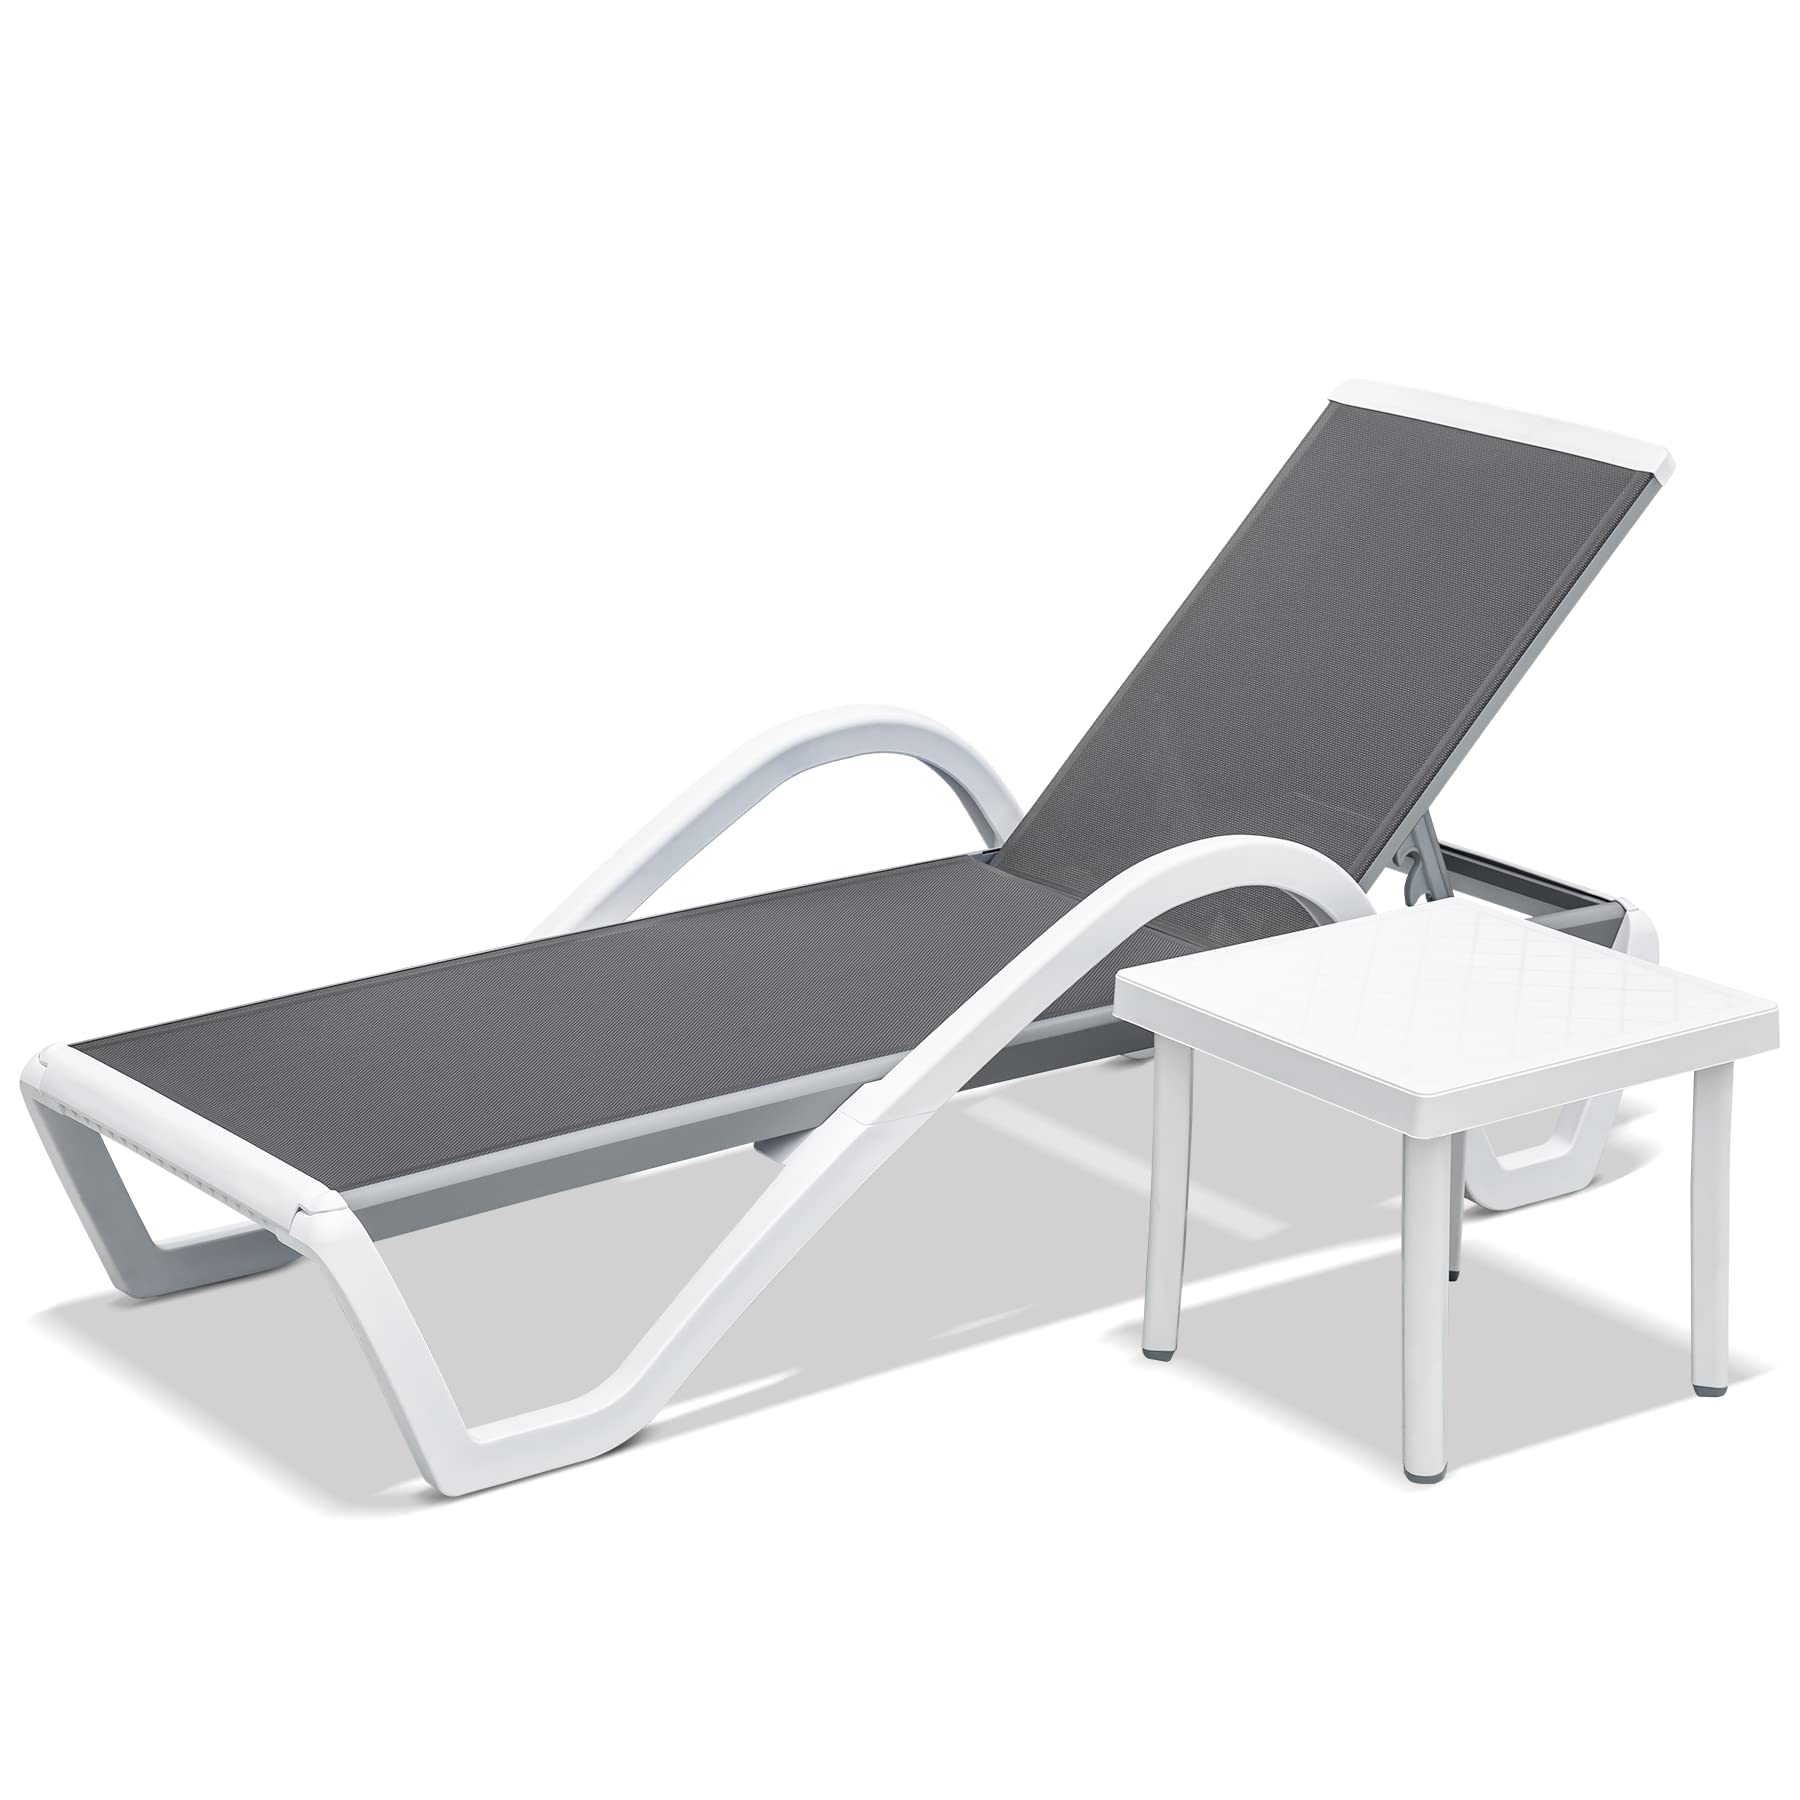 Mydepot Domi Patio Chaise Lounge, Outdoor Aluminum Chair, Adjustable Backrest, Beach Patio Chair - image 1 of 4